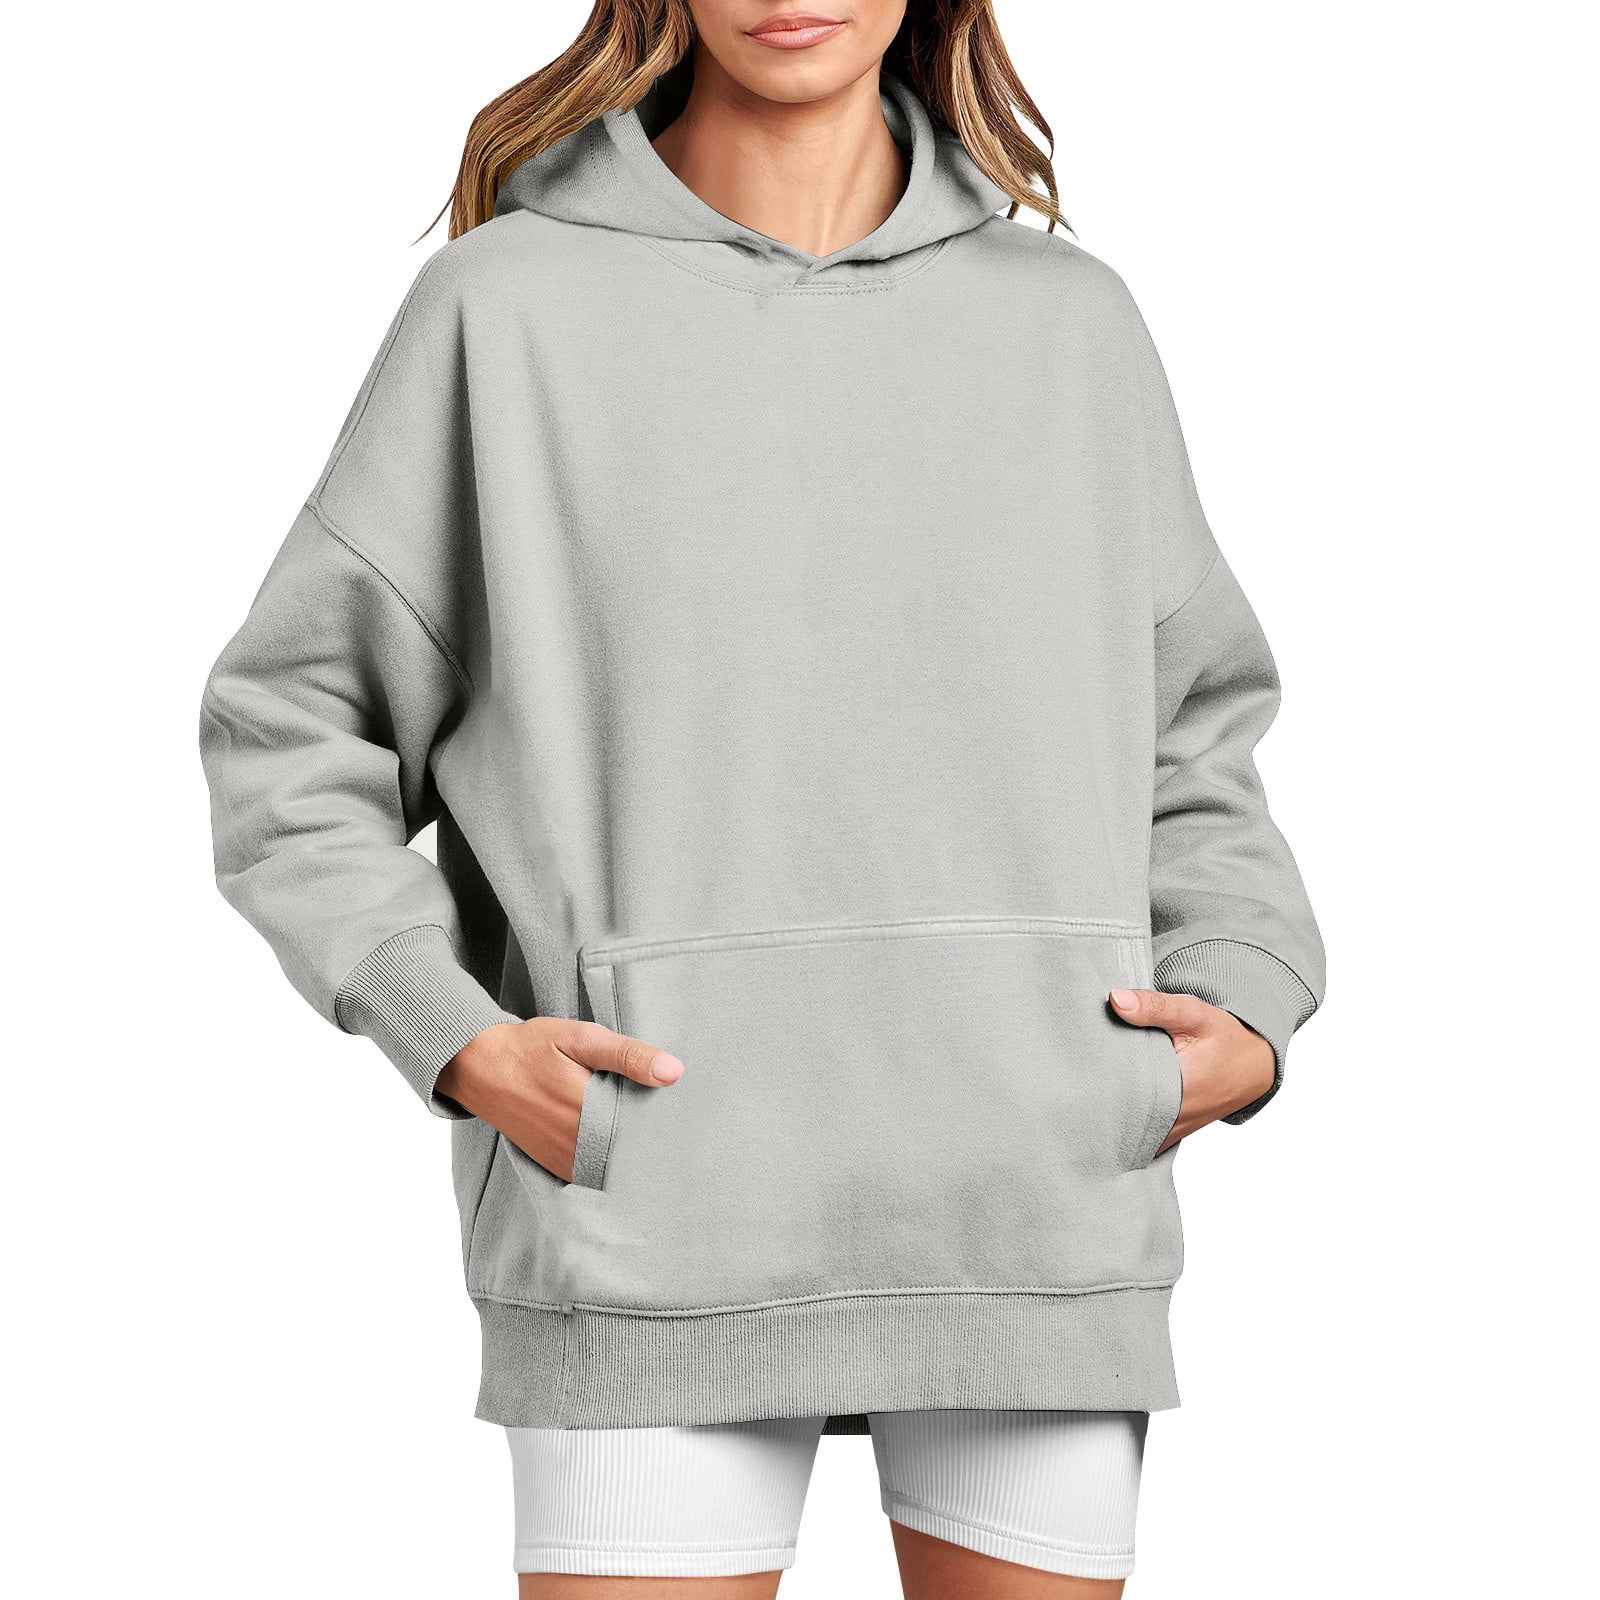 YNGWIAO Fall Clothes Women camo sweatshirt My Oders,Hoodies For Teen Girls  Black,Womans Clothes,women's sweats,womens hooded cardigan,Cheap Items  Under 1 Dollars at  Women's Clothing store